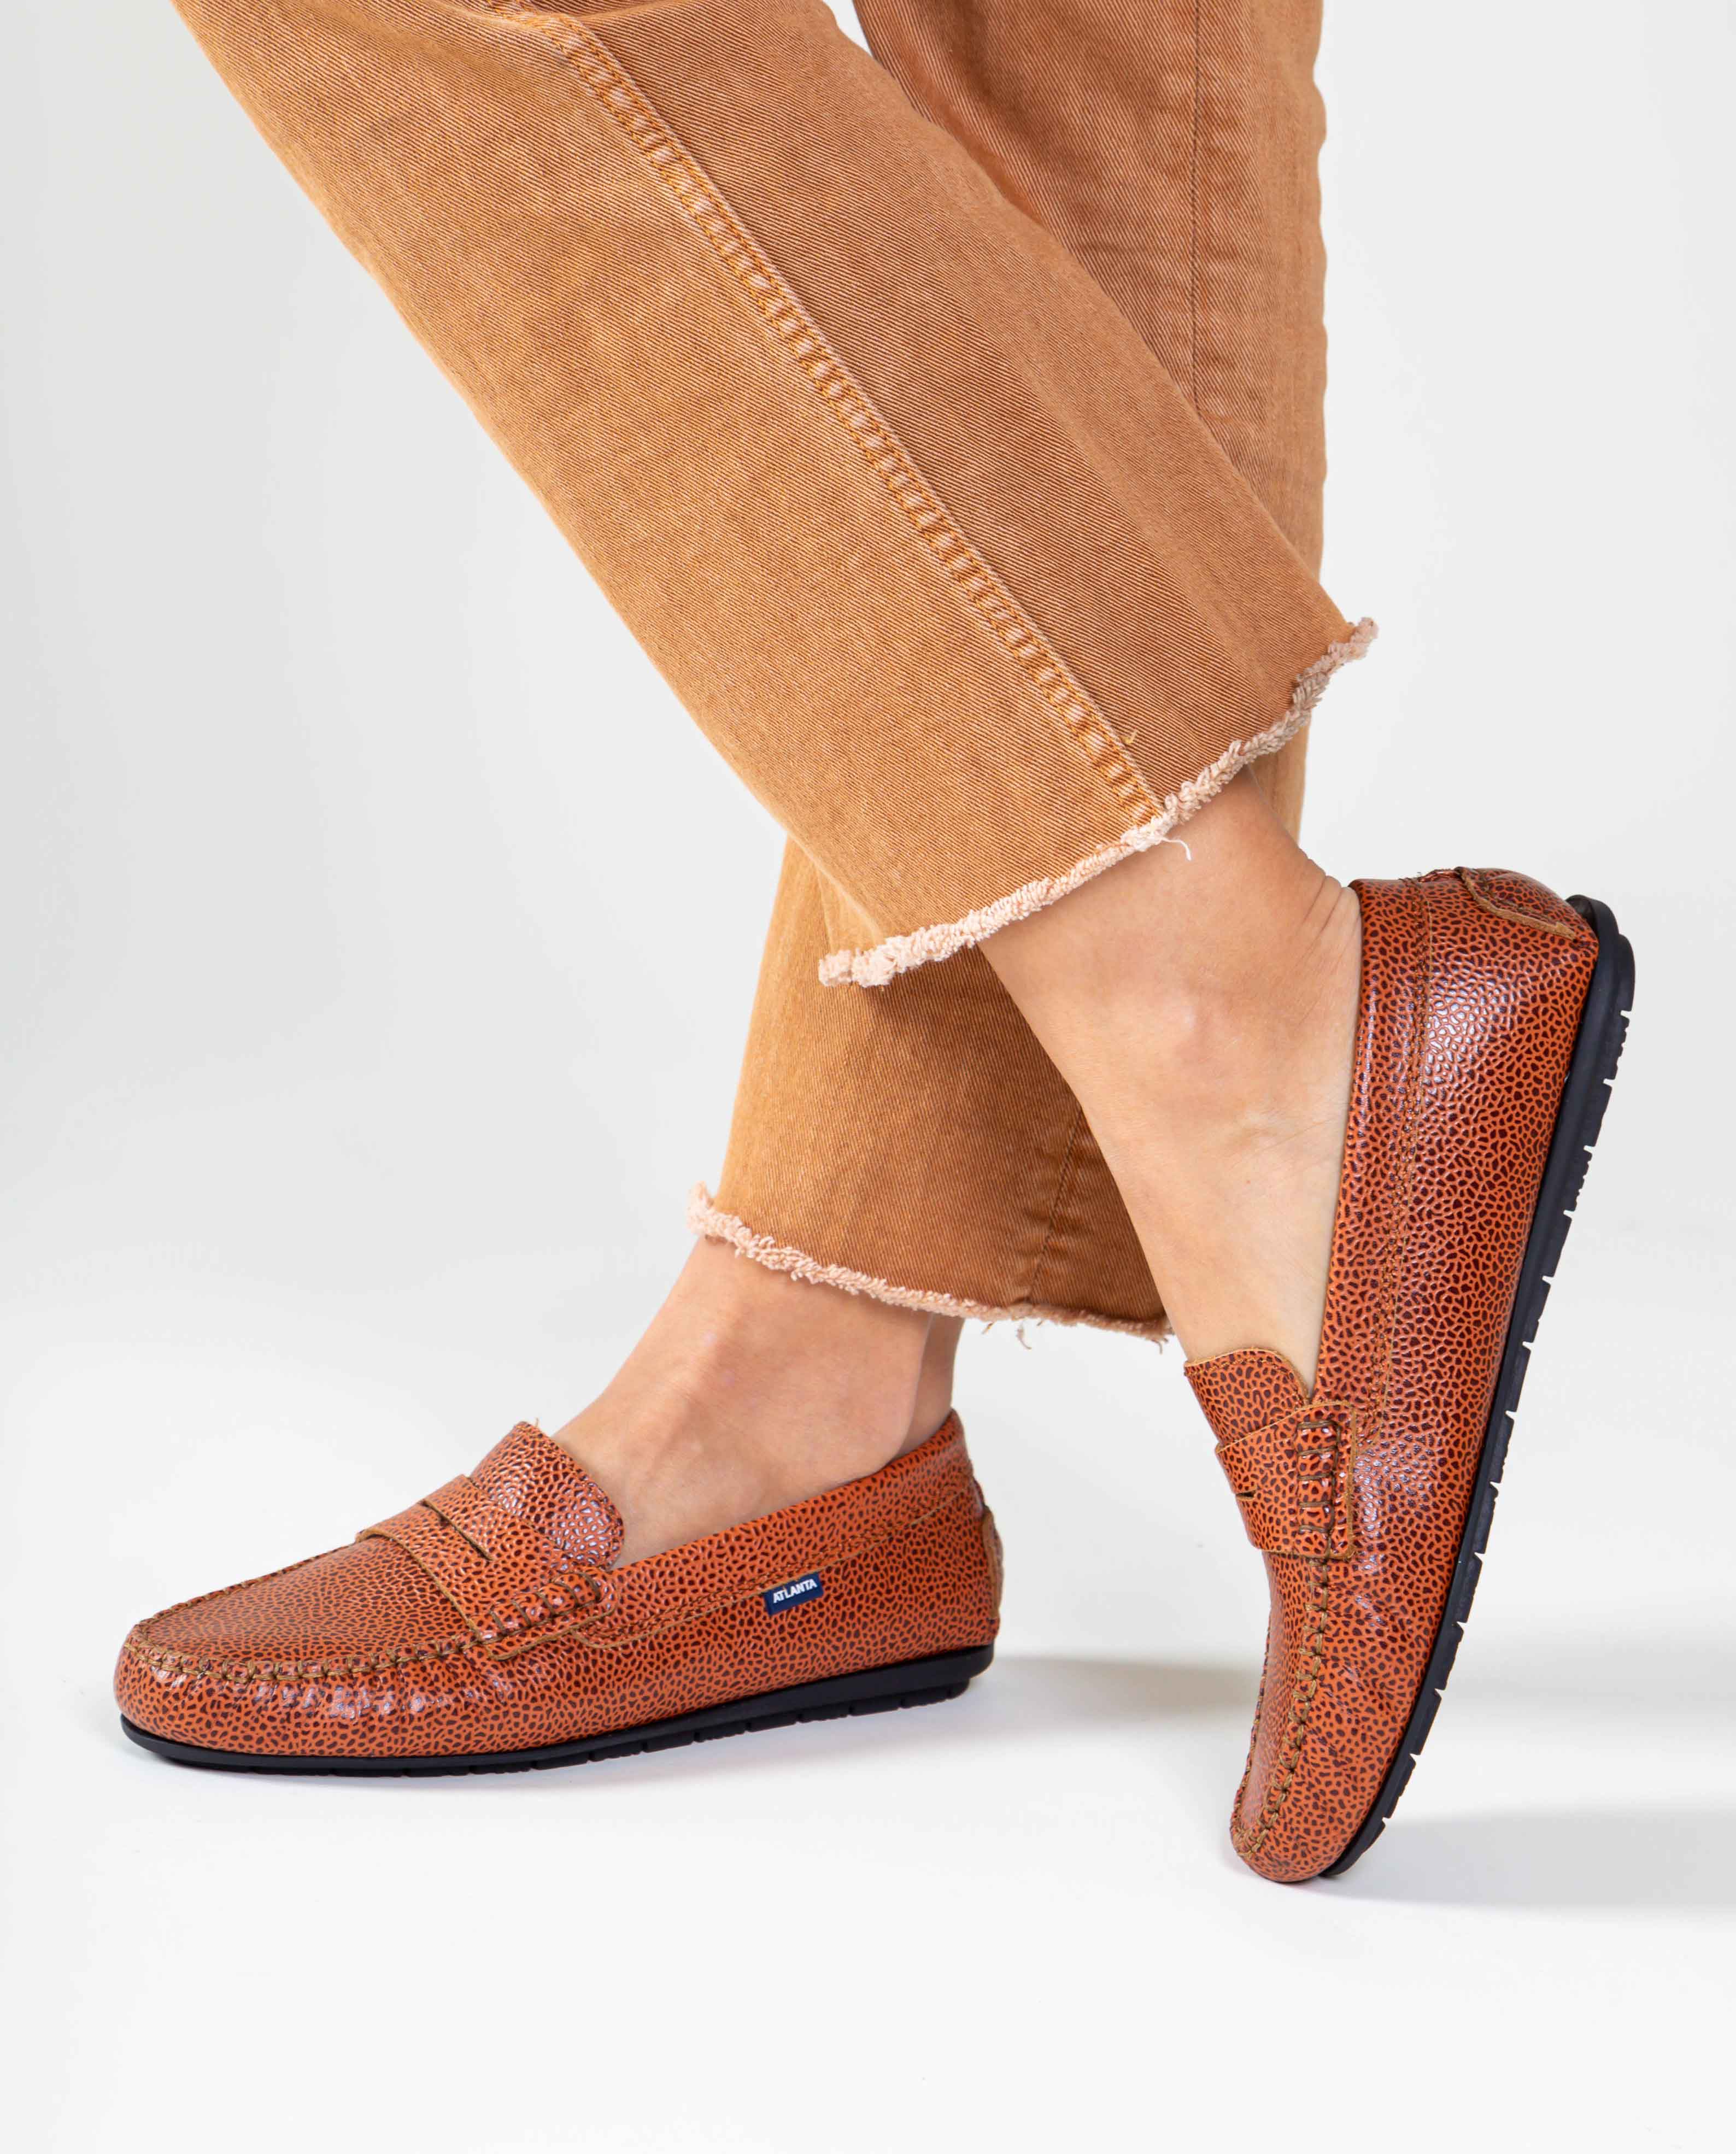 Penny Moccasins in Large Grainy Leather - Camel - Atlanta Mocassin